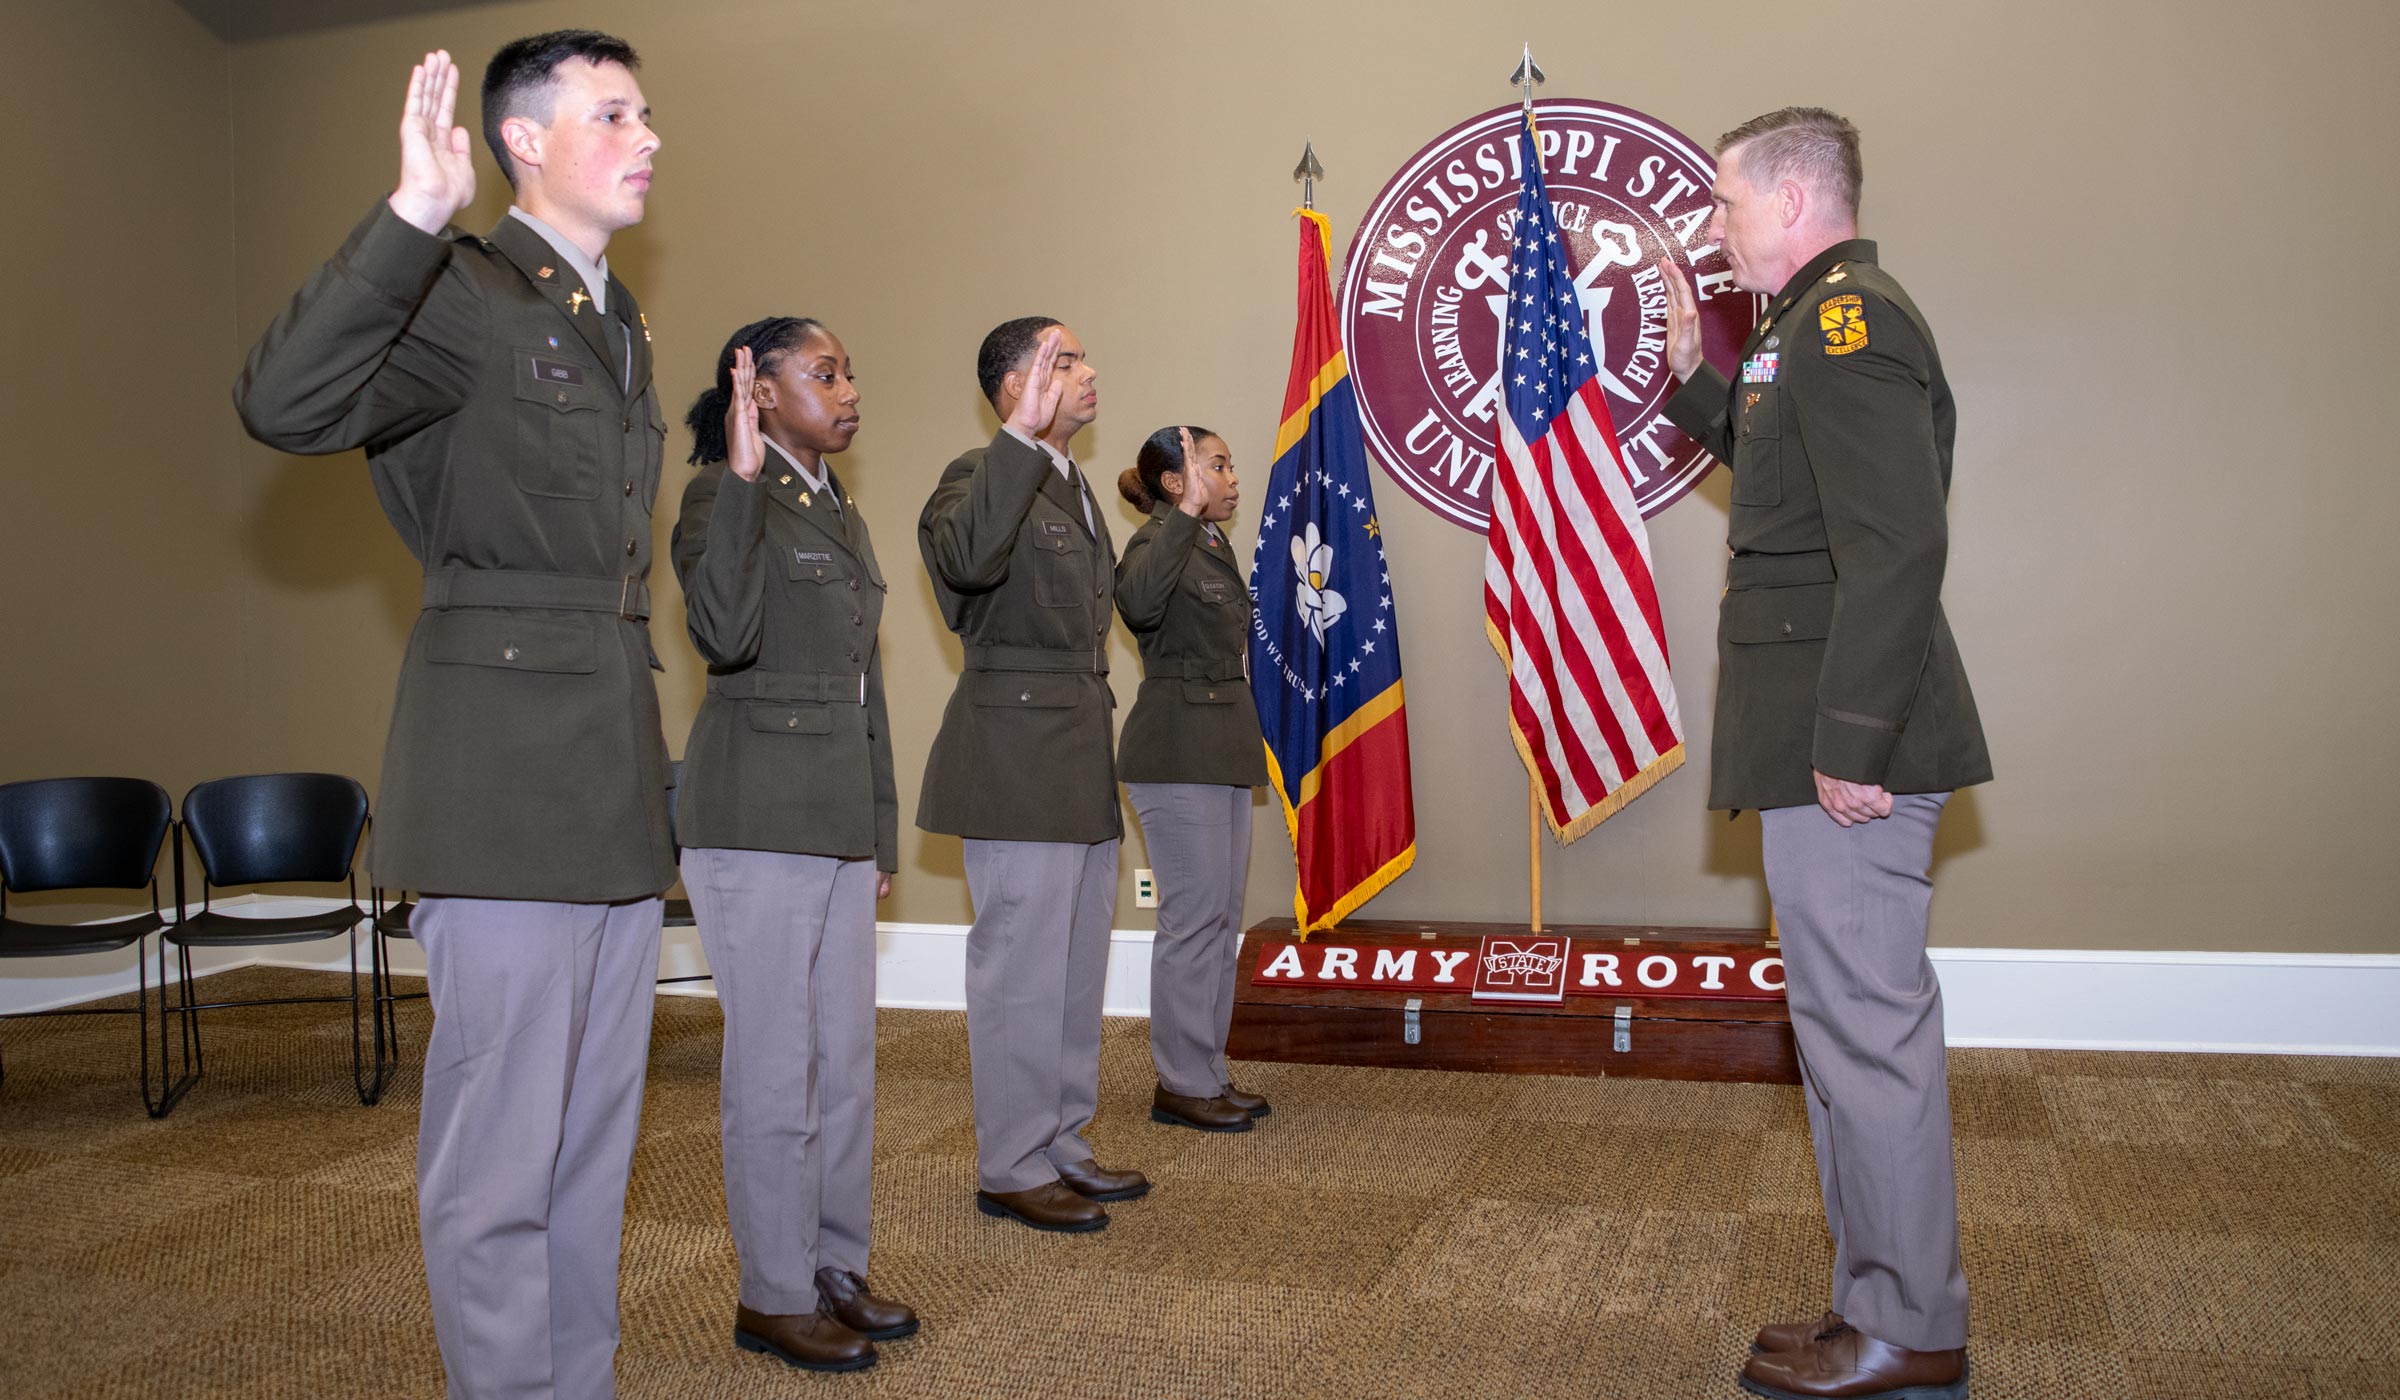 Individuals in green army dress uniforms taking oath in front of American and state flags